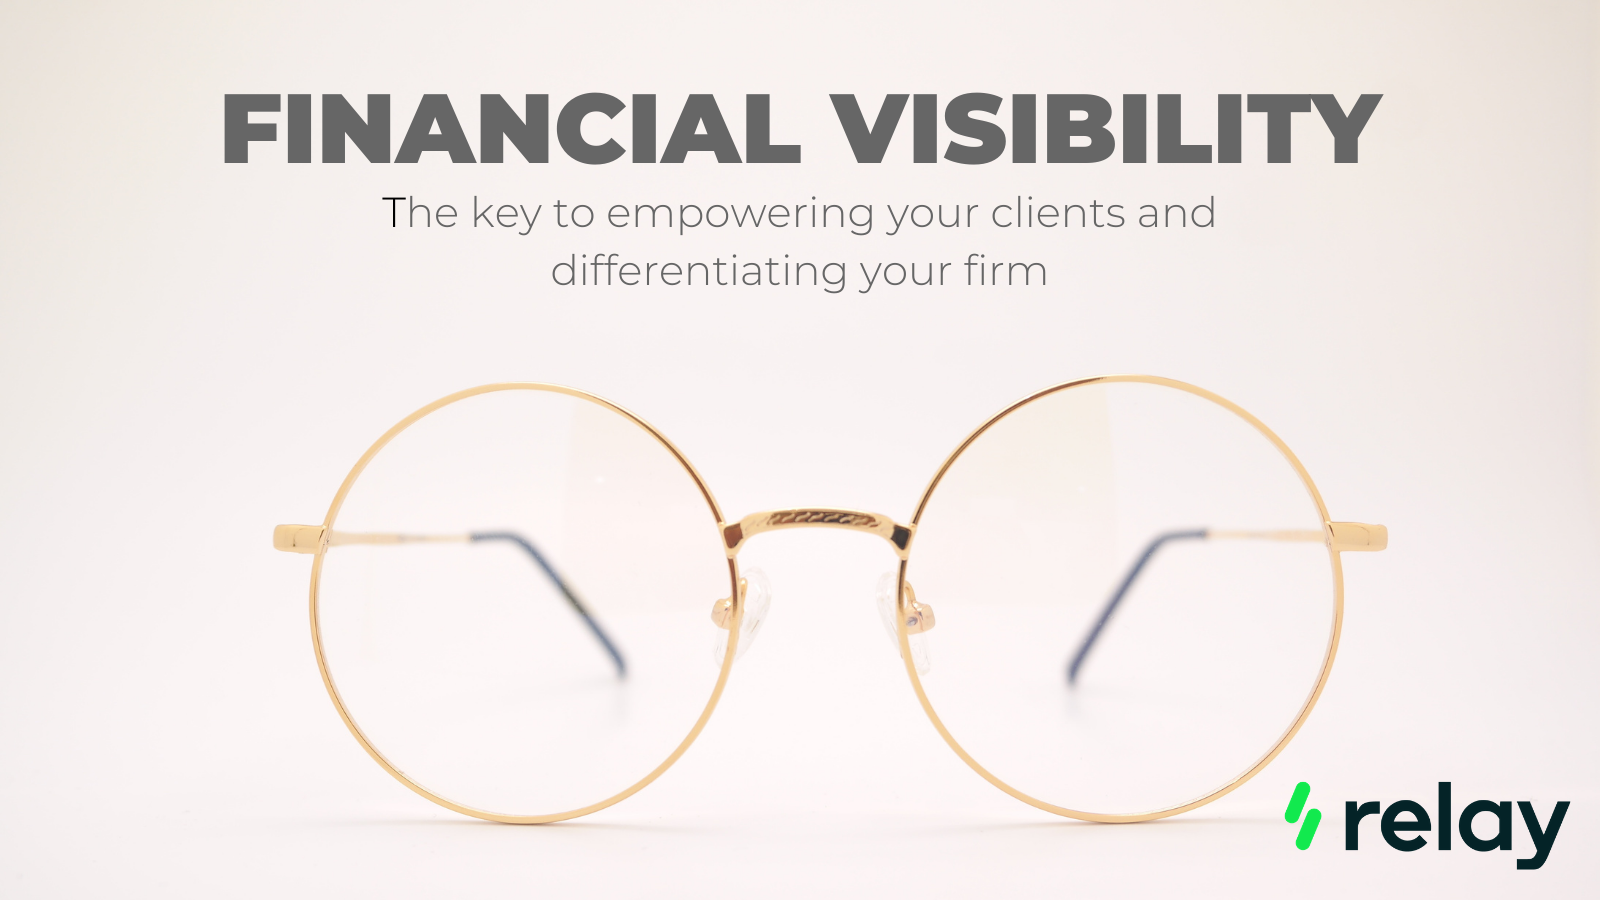 Financial Visibility: The Key to Empowering your Clients and Differentiating your Firm